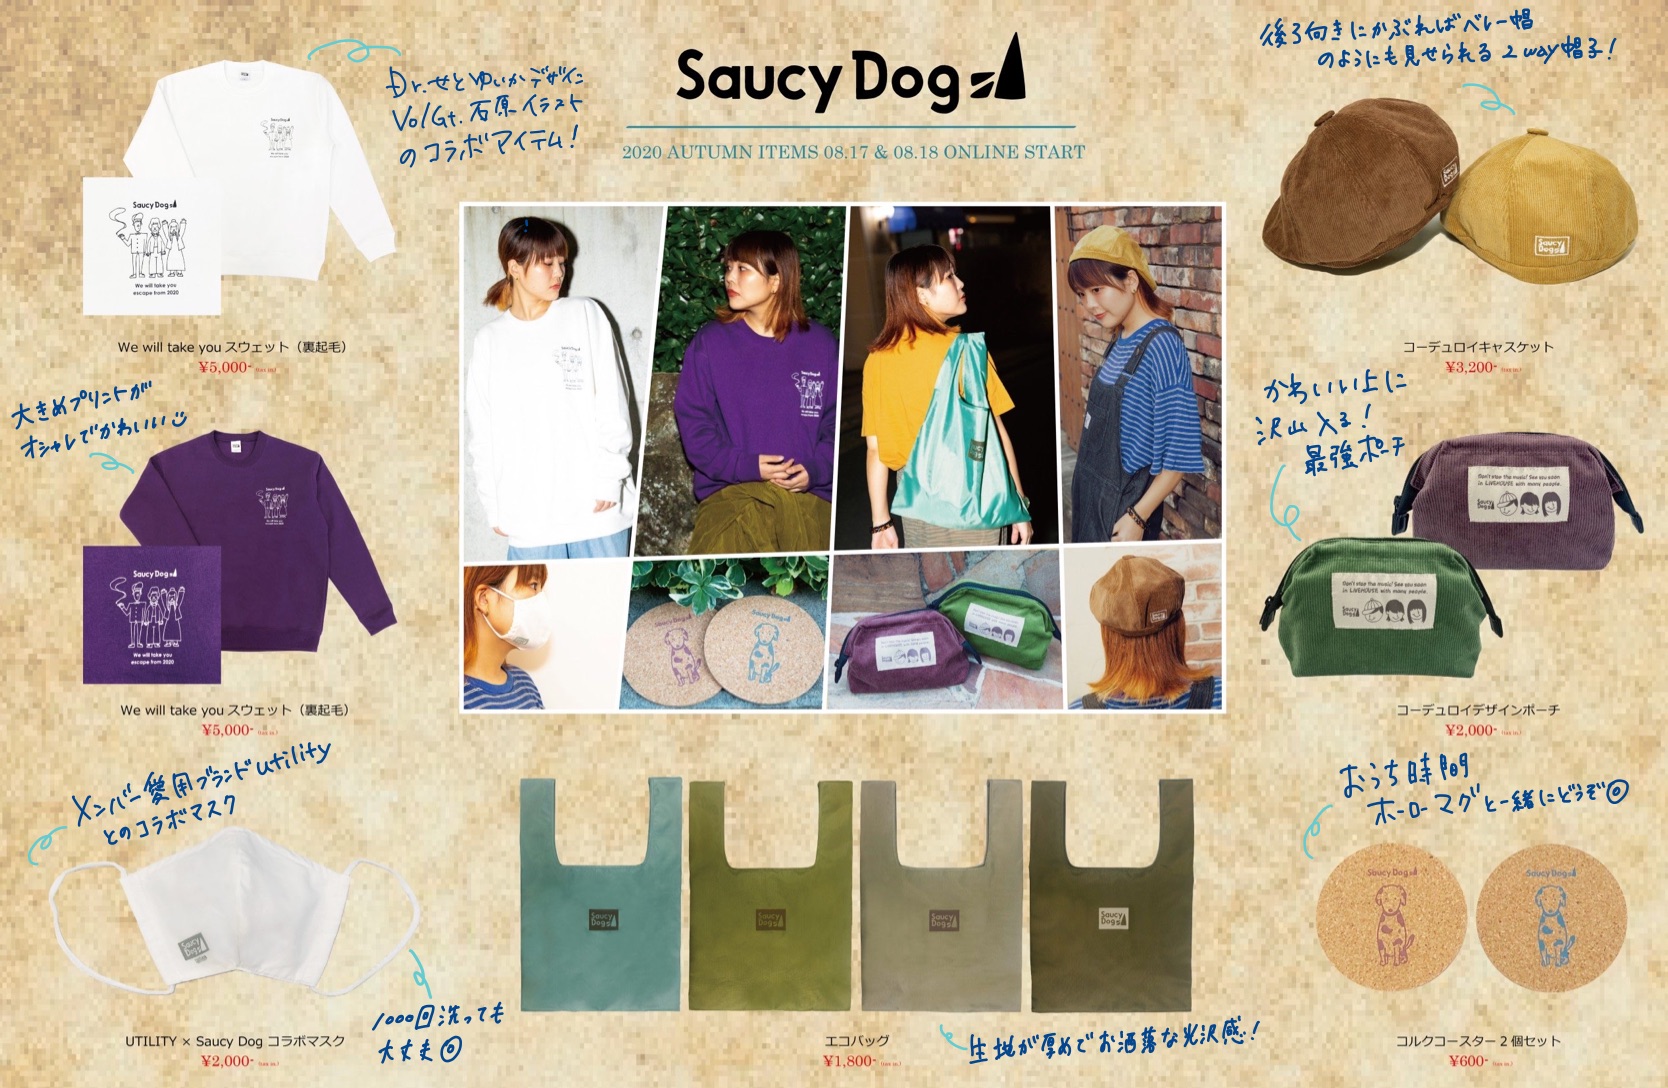 Saucy Dog サウシー グッズ 6点セット 【即日発送可能】-